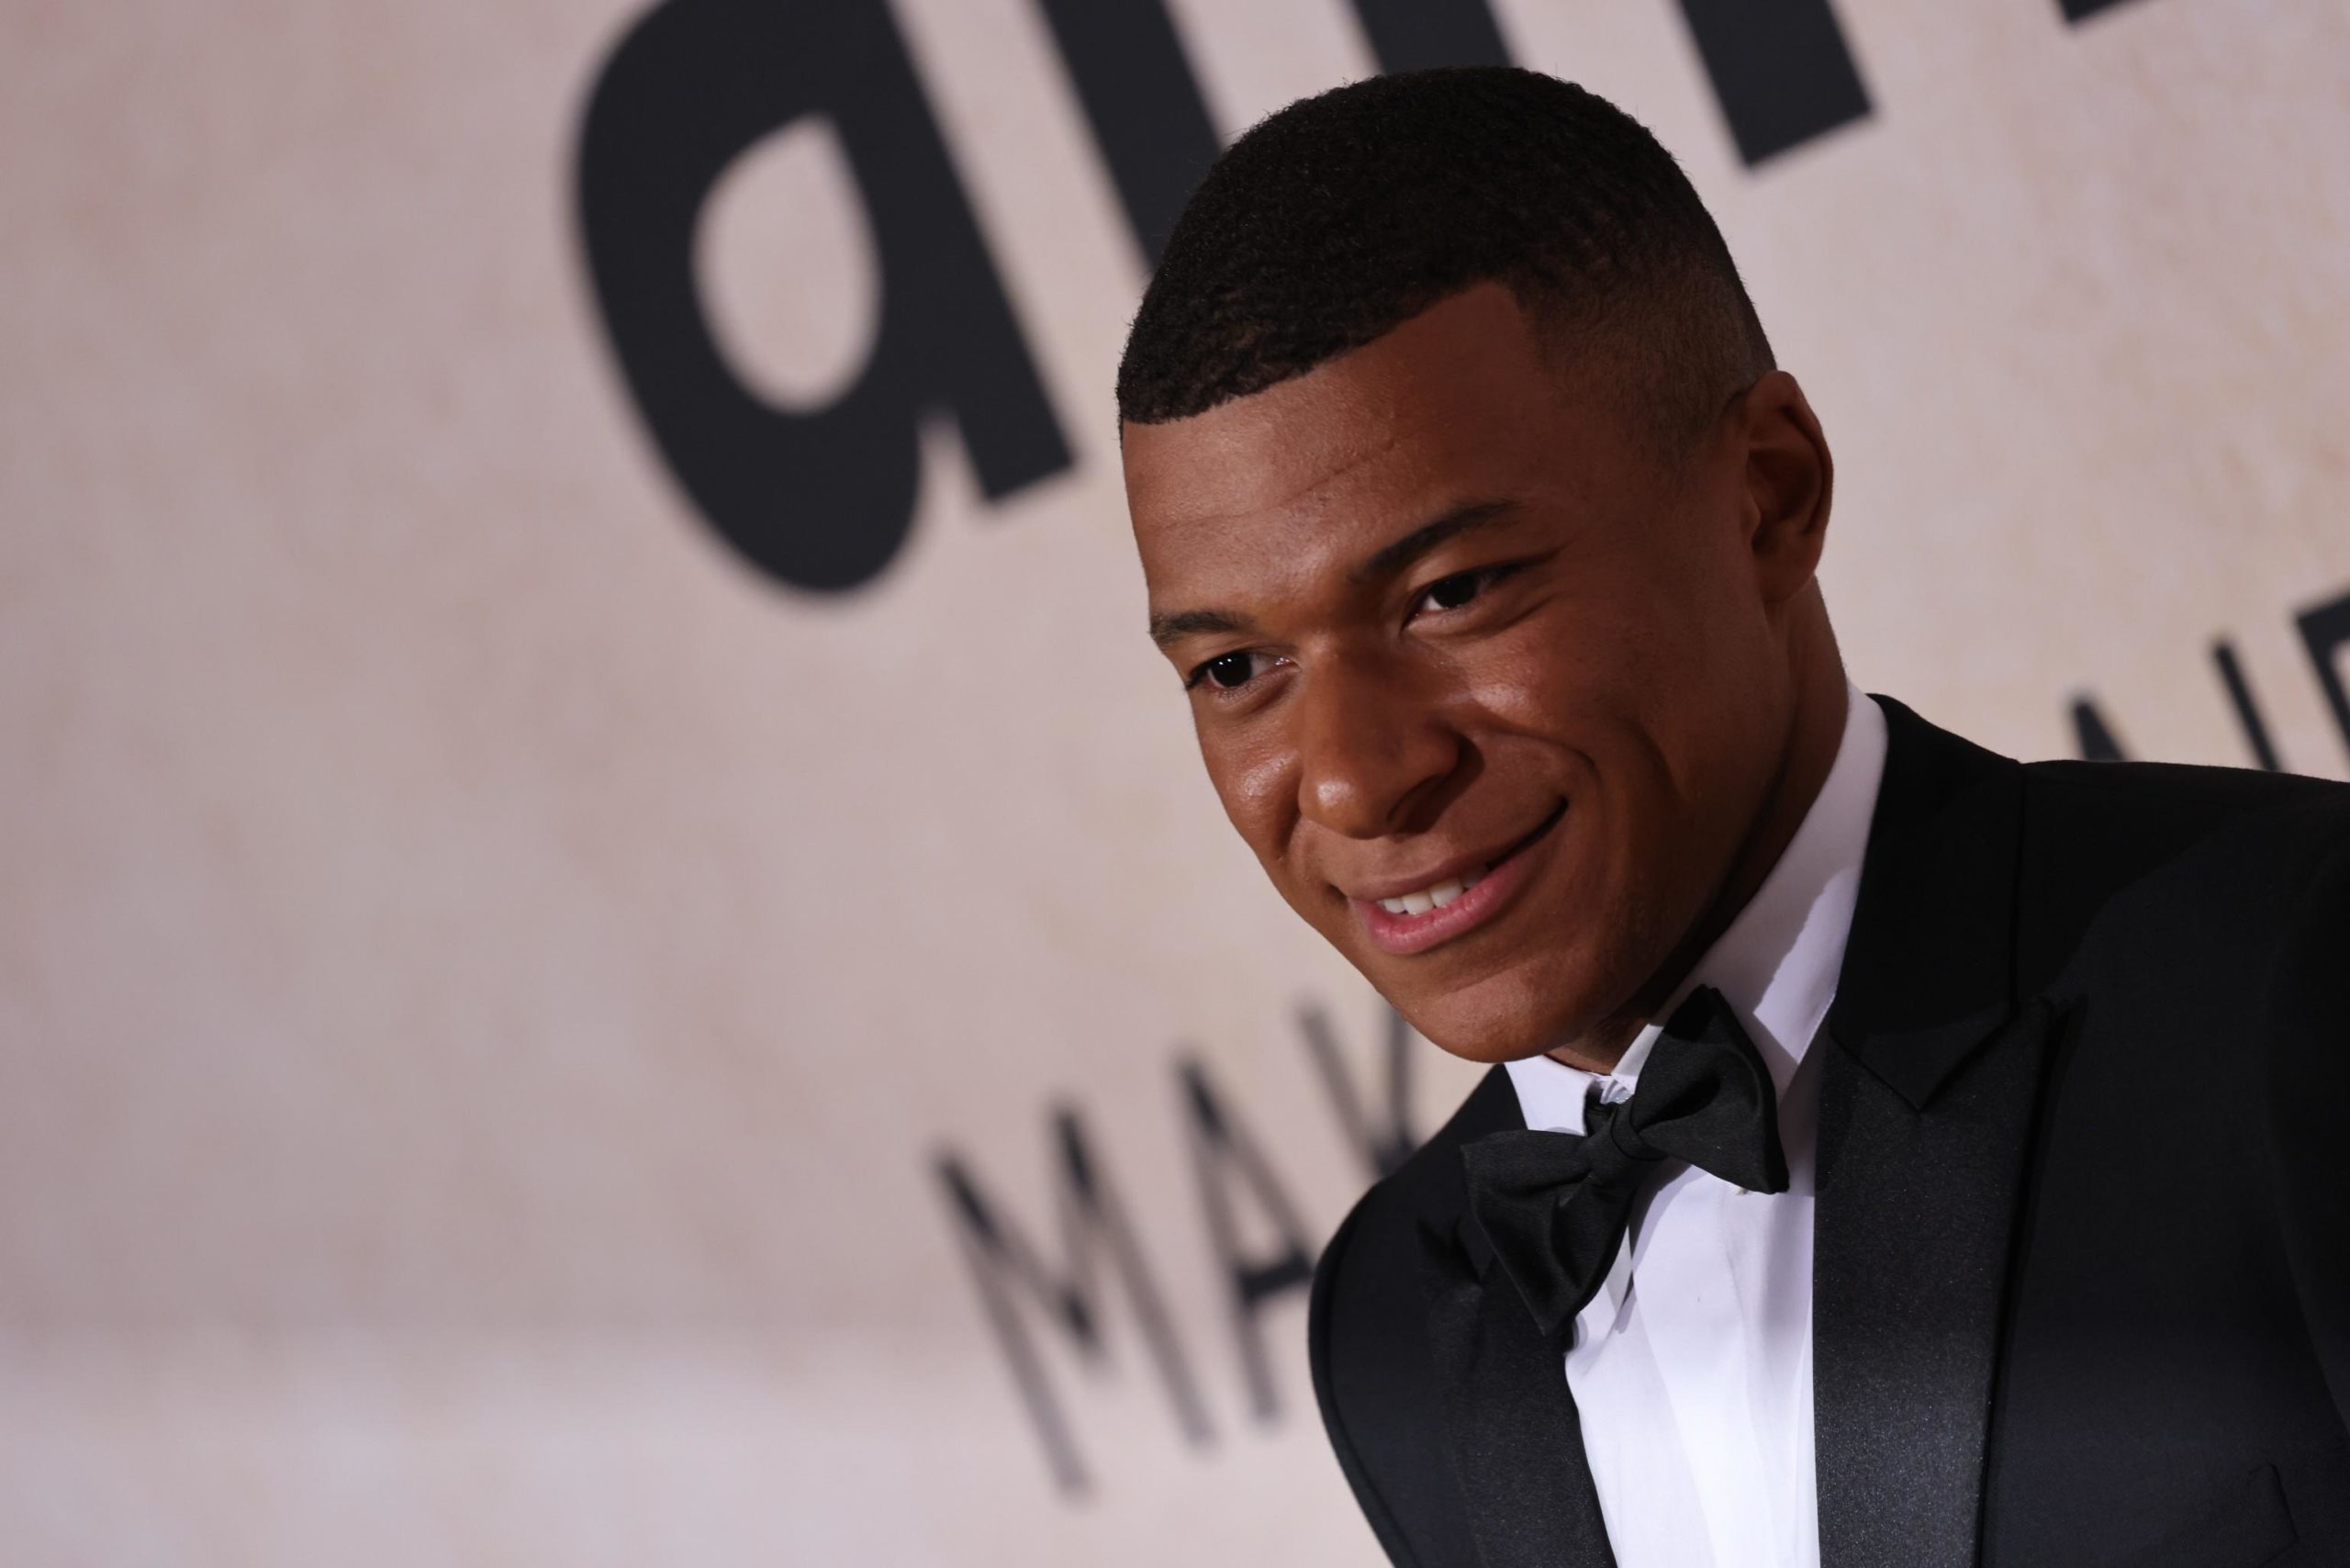 epa09978573 Kylian Mbappé attends the Cinema Against AIDS amfAR gala 2022 held at Hotel du Cap-Eden-Roc in Cap d'Antibes, France, 26 May 2022, within the scope of the 75th annual Cannes Film Festival that runs from 17 to 28 May.  EPA/OLIVIER SANCHEZ